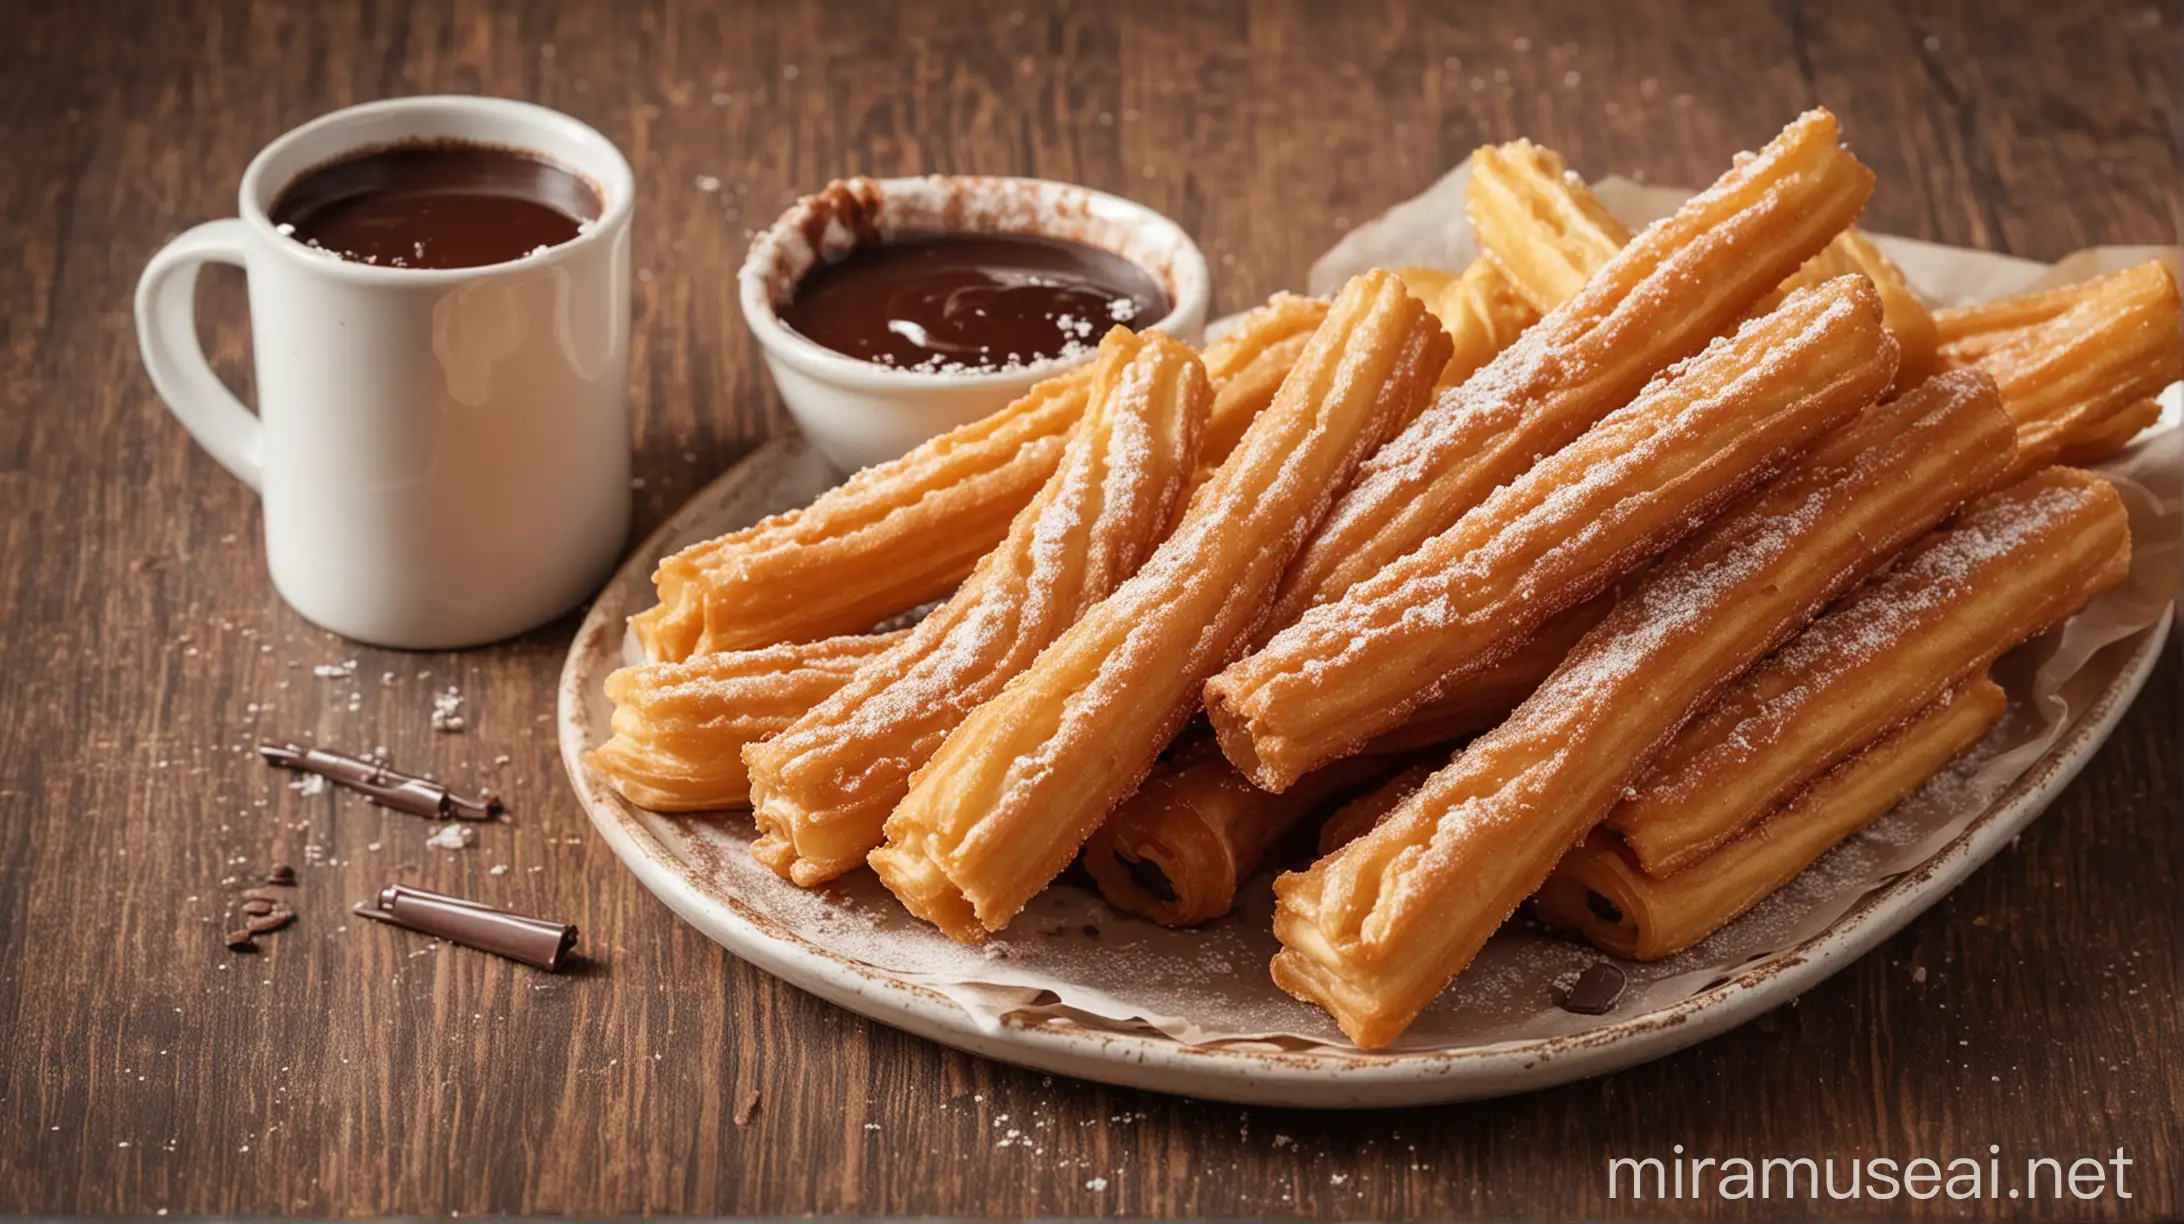 Delicious Churros Dipped in Decadent Chocolate Sauce